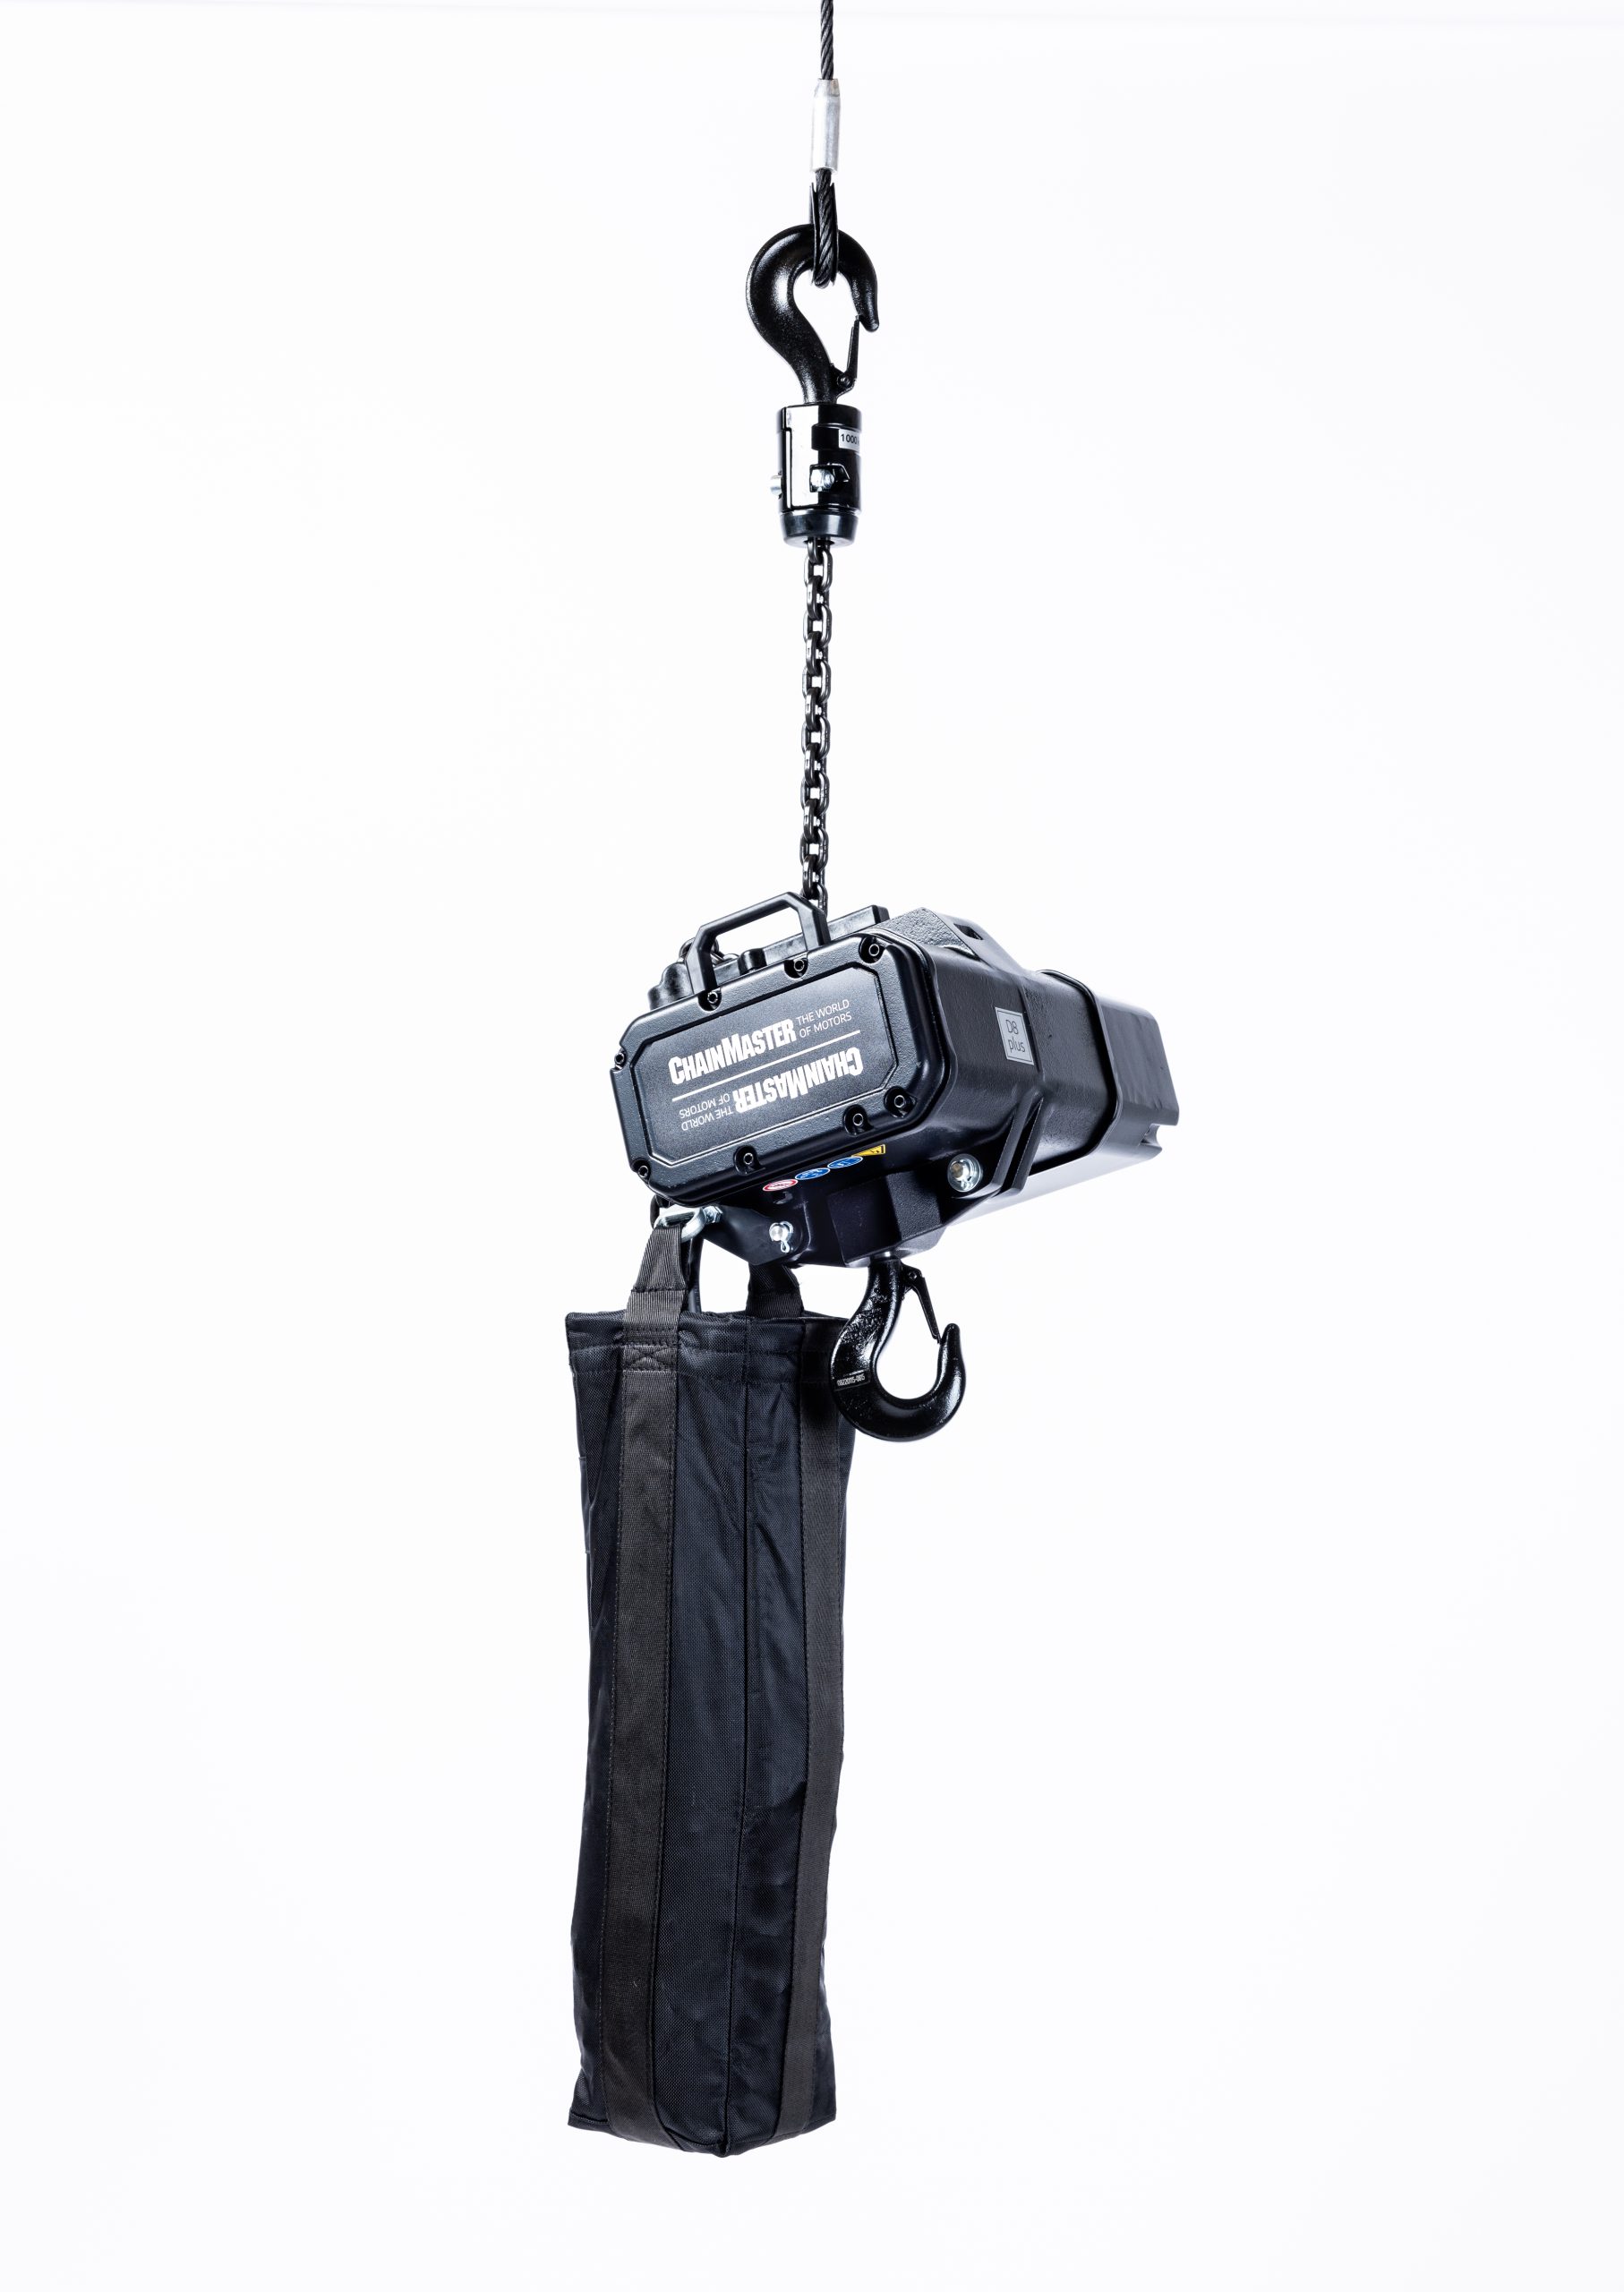 CHAINMASTER D8Plus Ultra 1000 kg, direct controlled, ready-to-use -  PSRIG.com